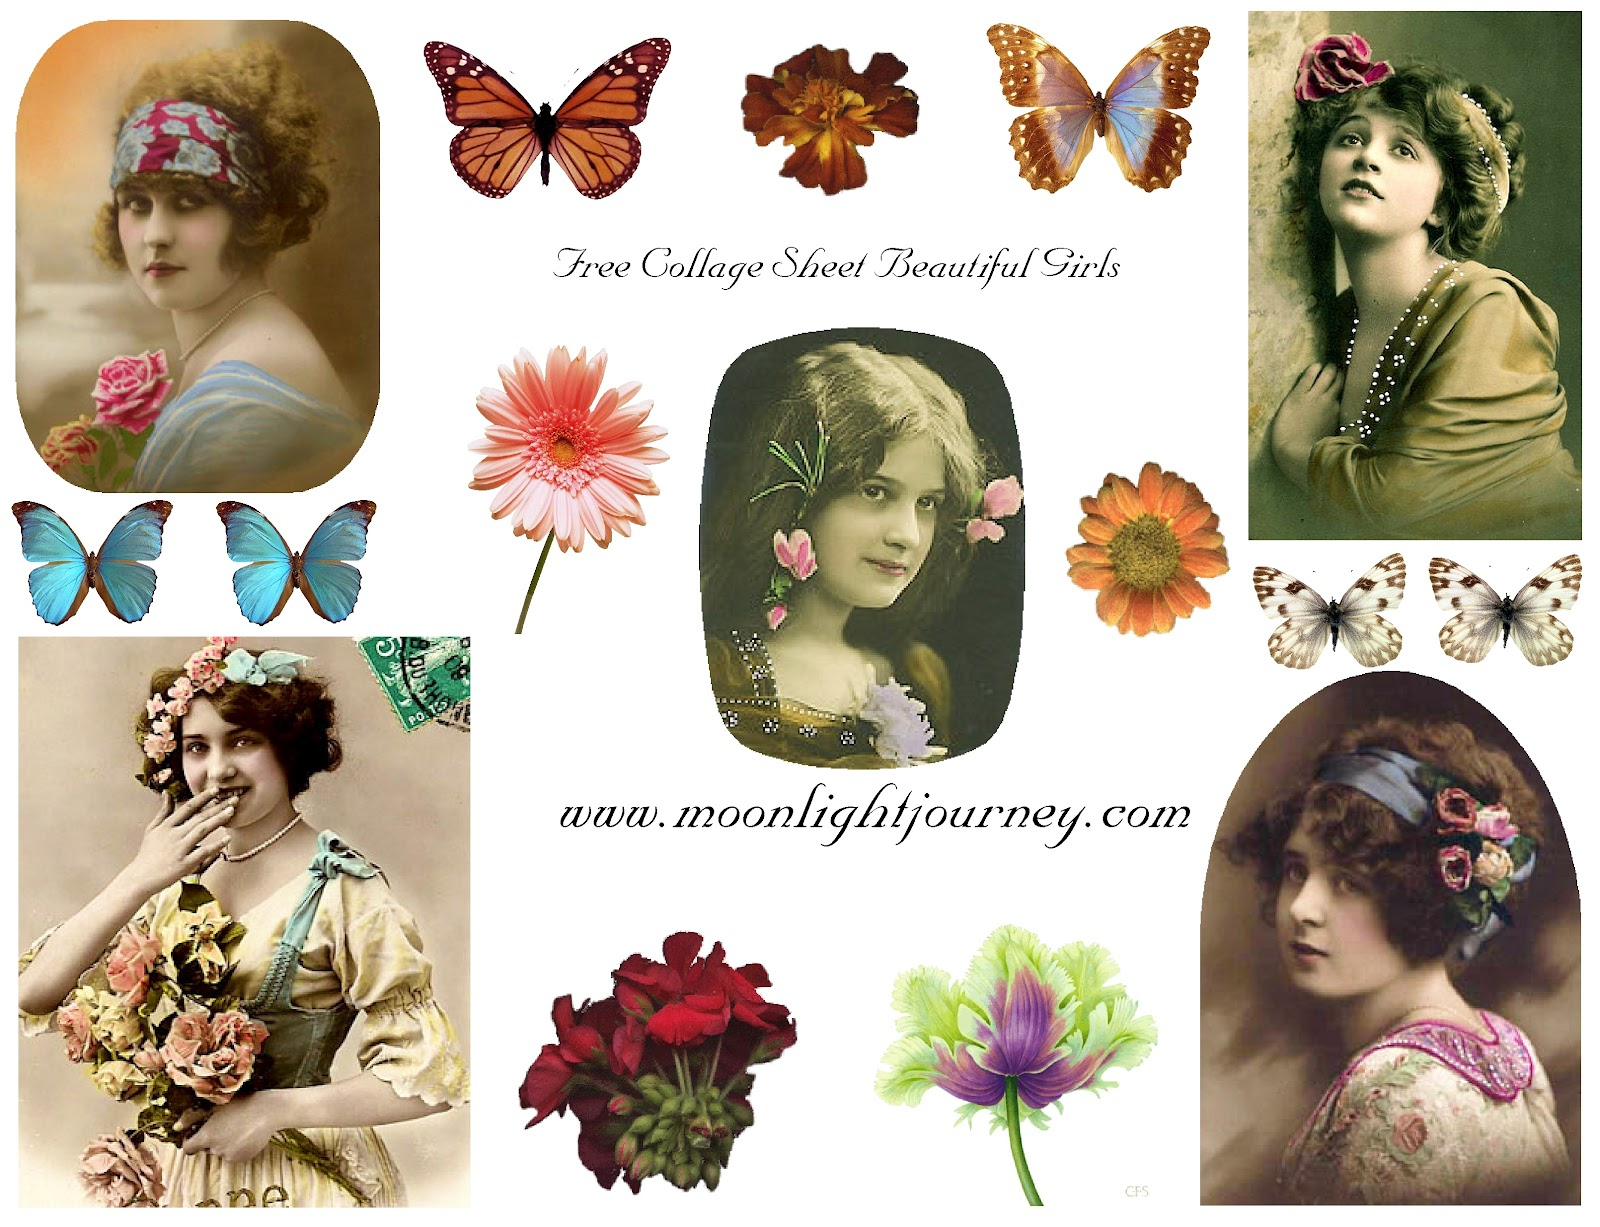 Moonlightjourney: Free Collage Sheets - Free Printable Picture Collage